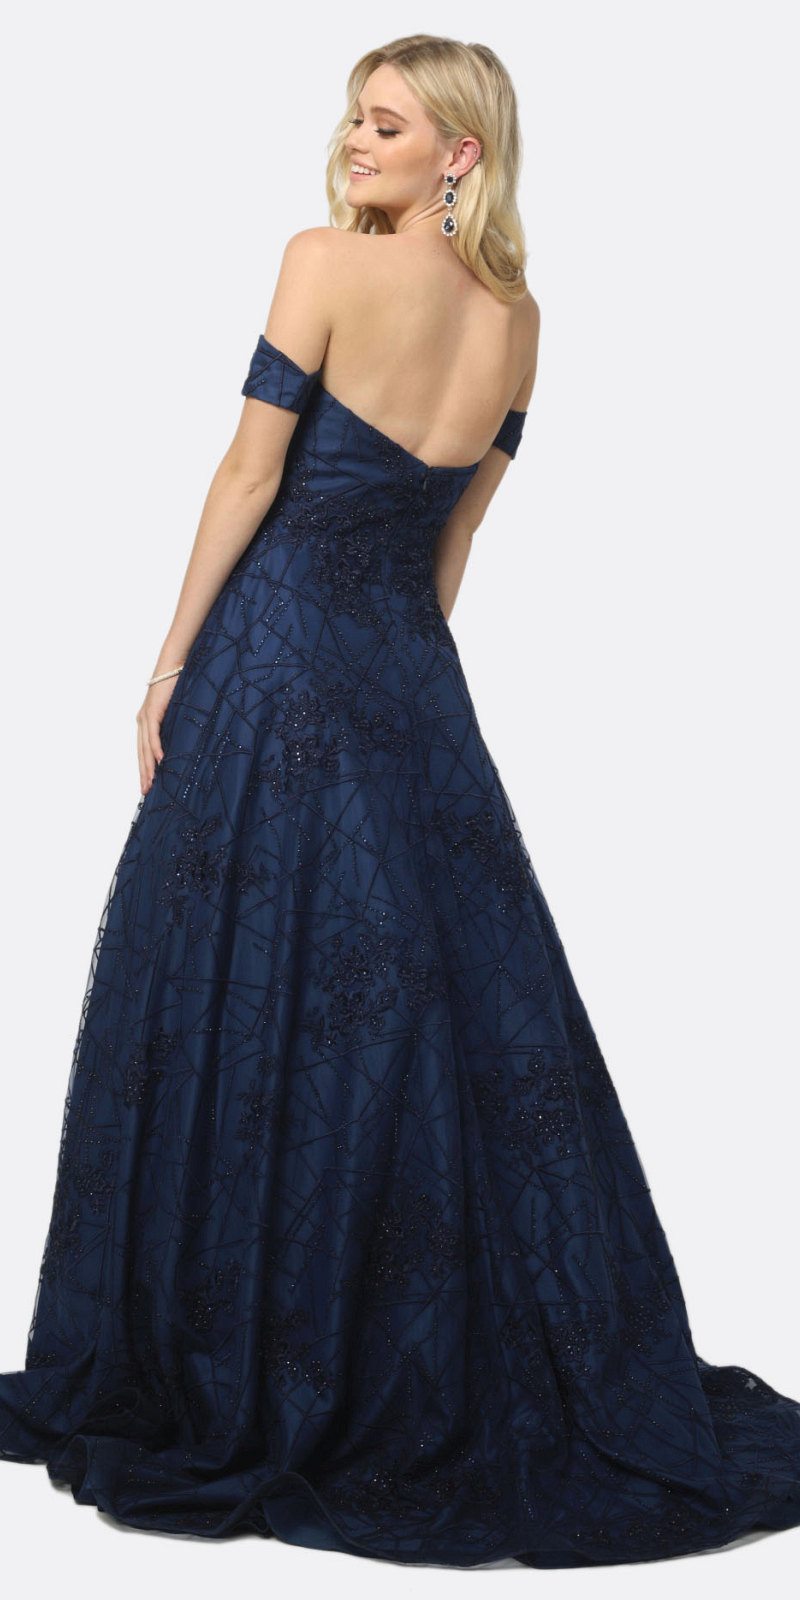 Juliet 692 Long Embroidered Lace Ball Gown Dress Navy With Arm Band